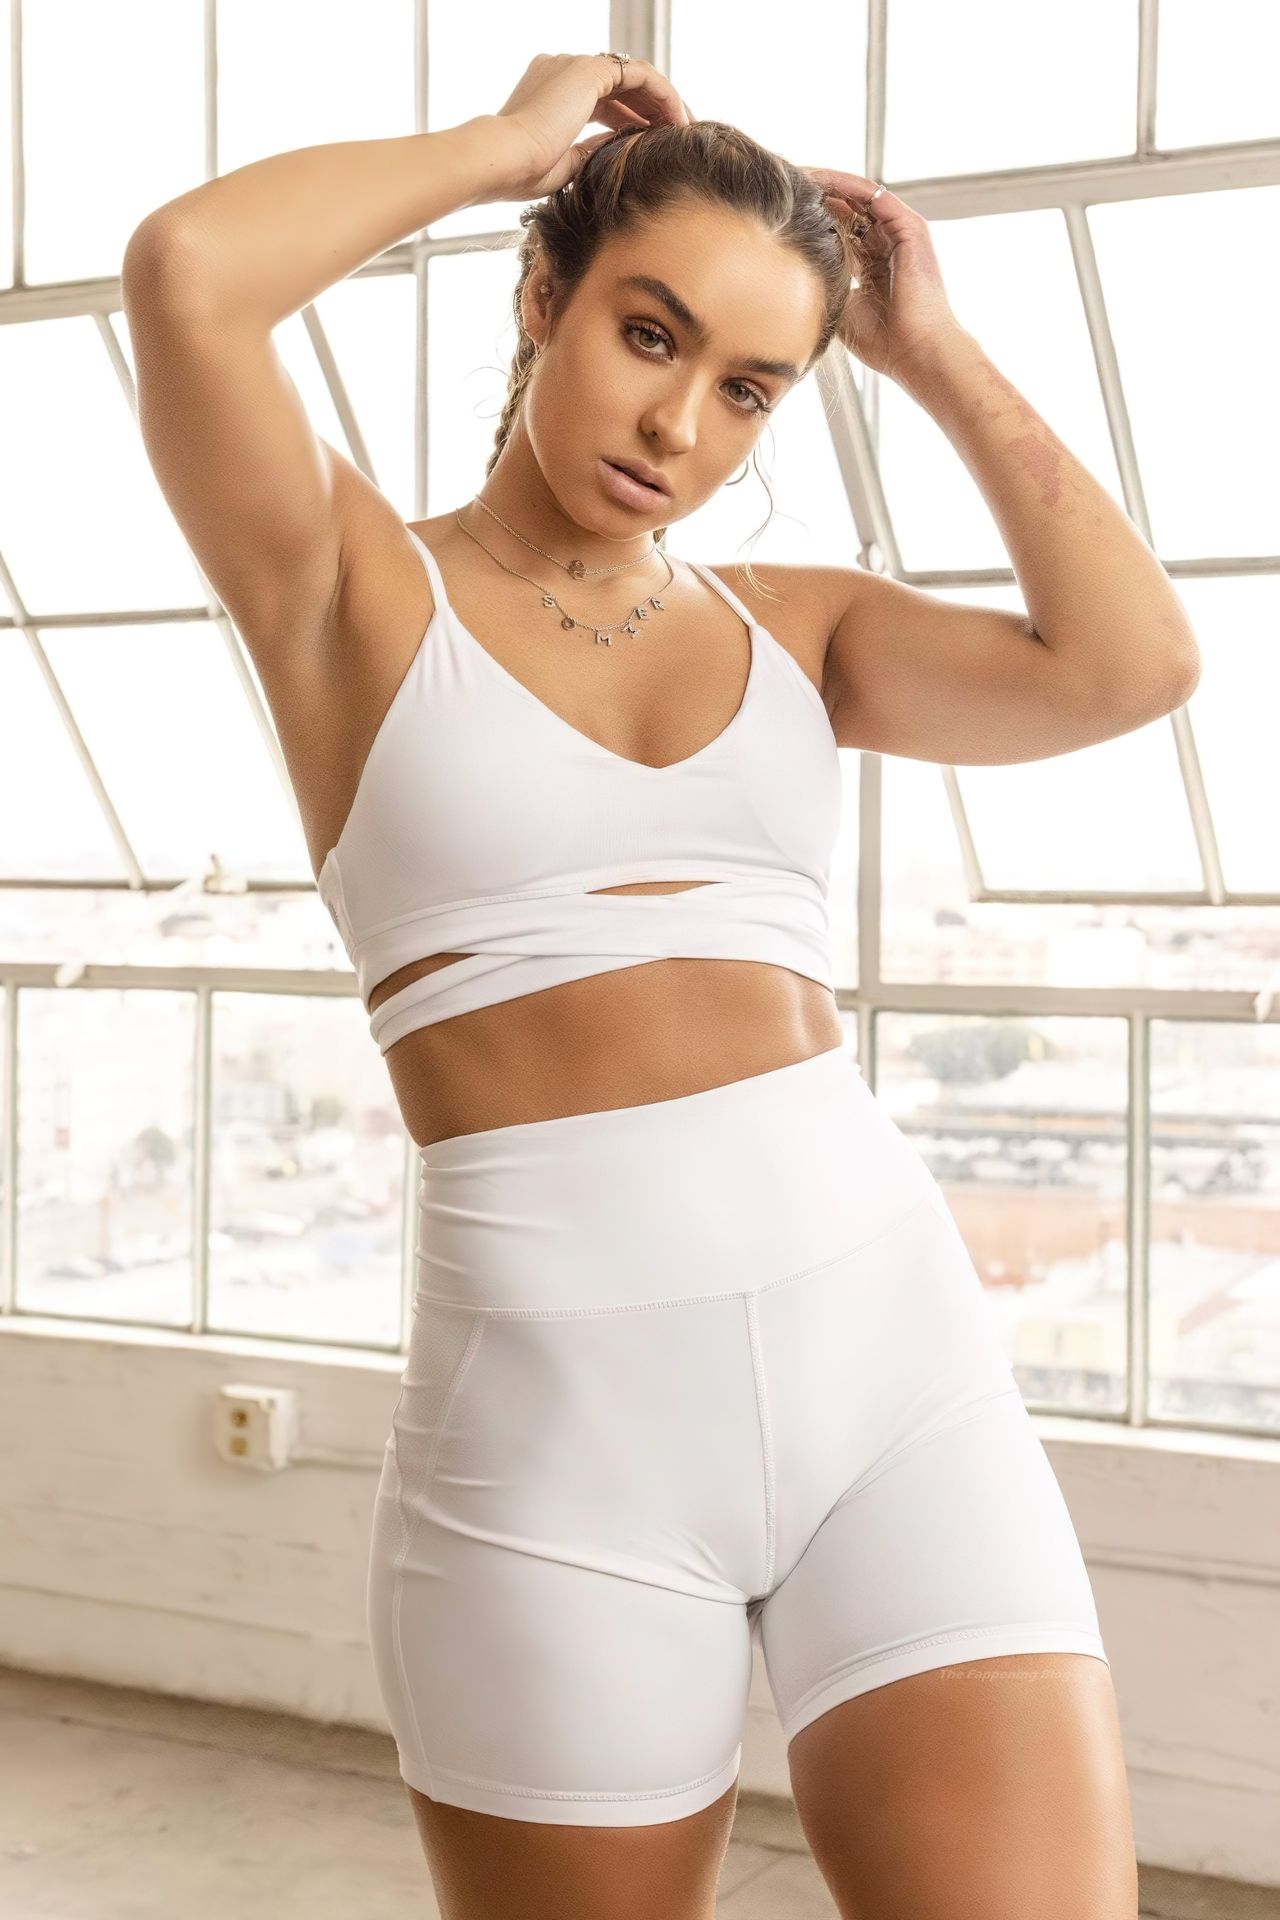 Sommer Ray Promotes Her Activewear (119 Photos)